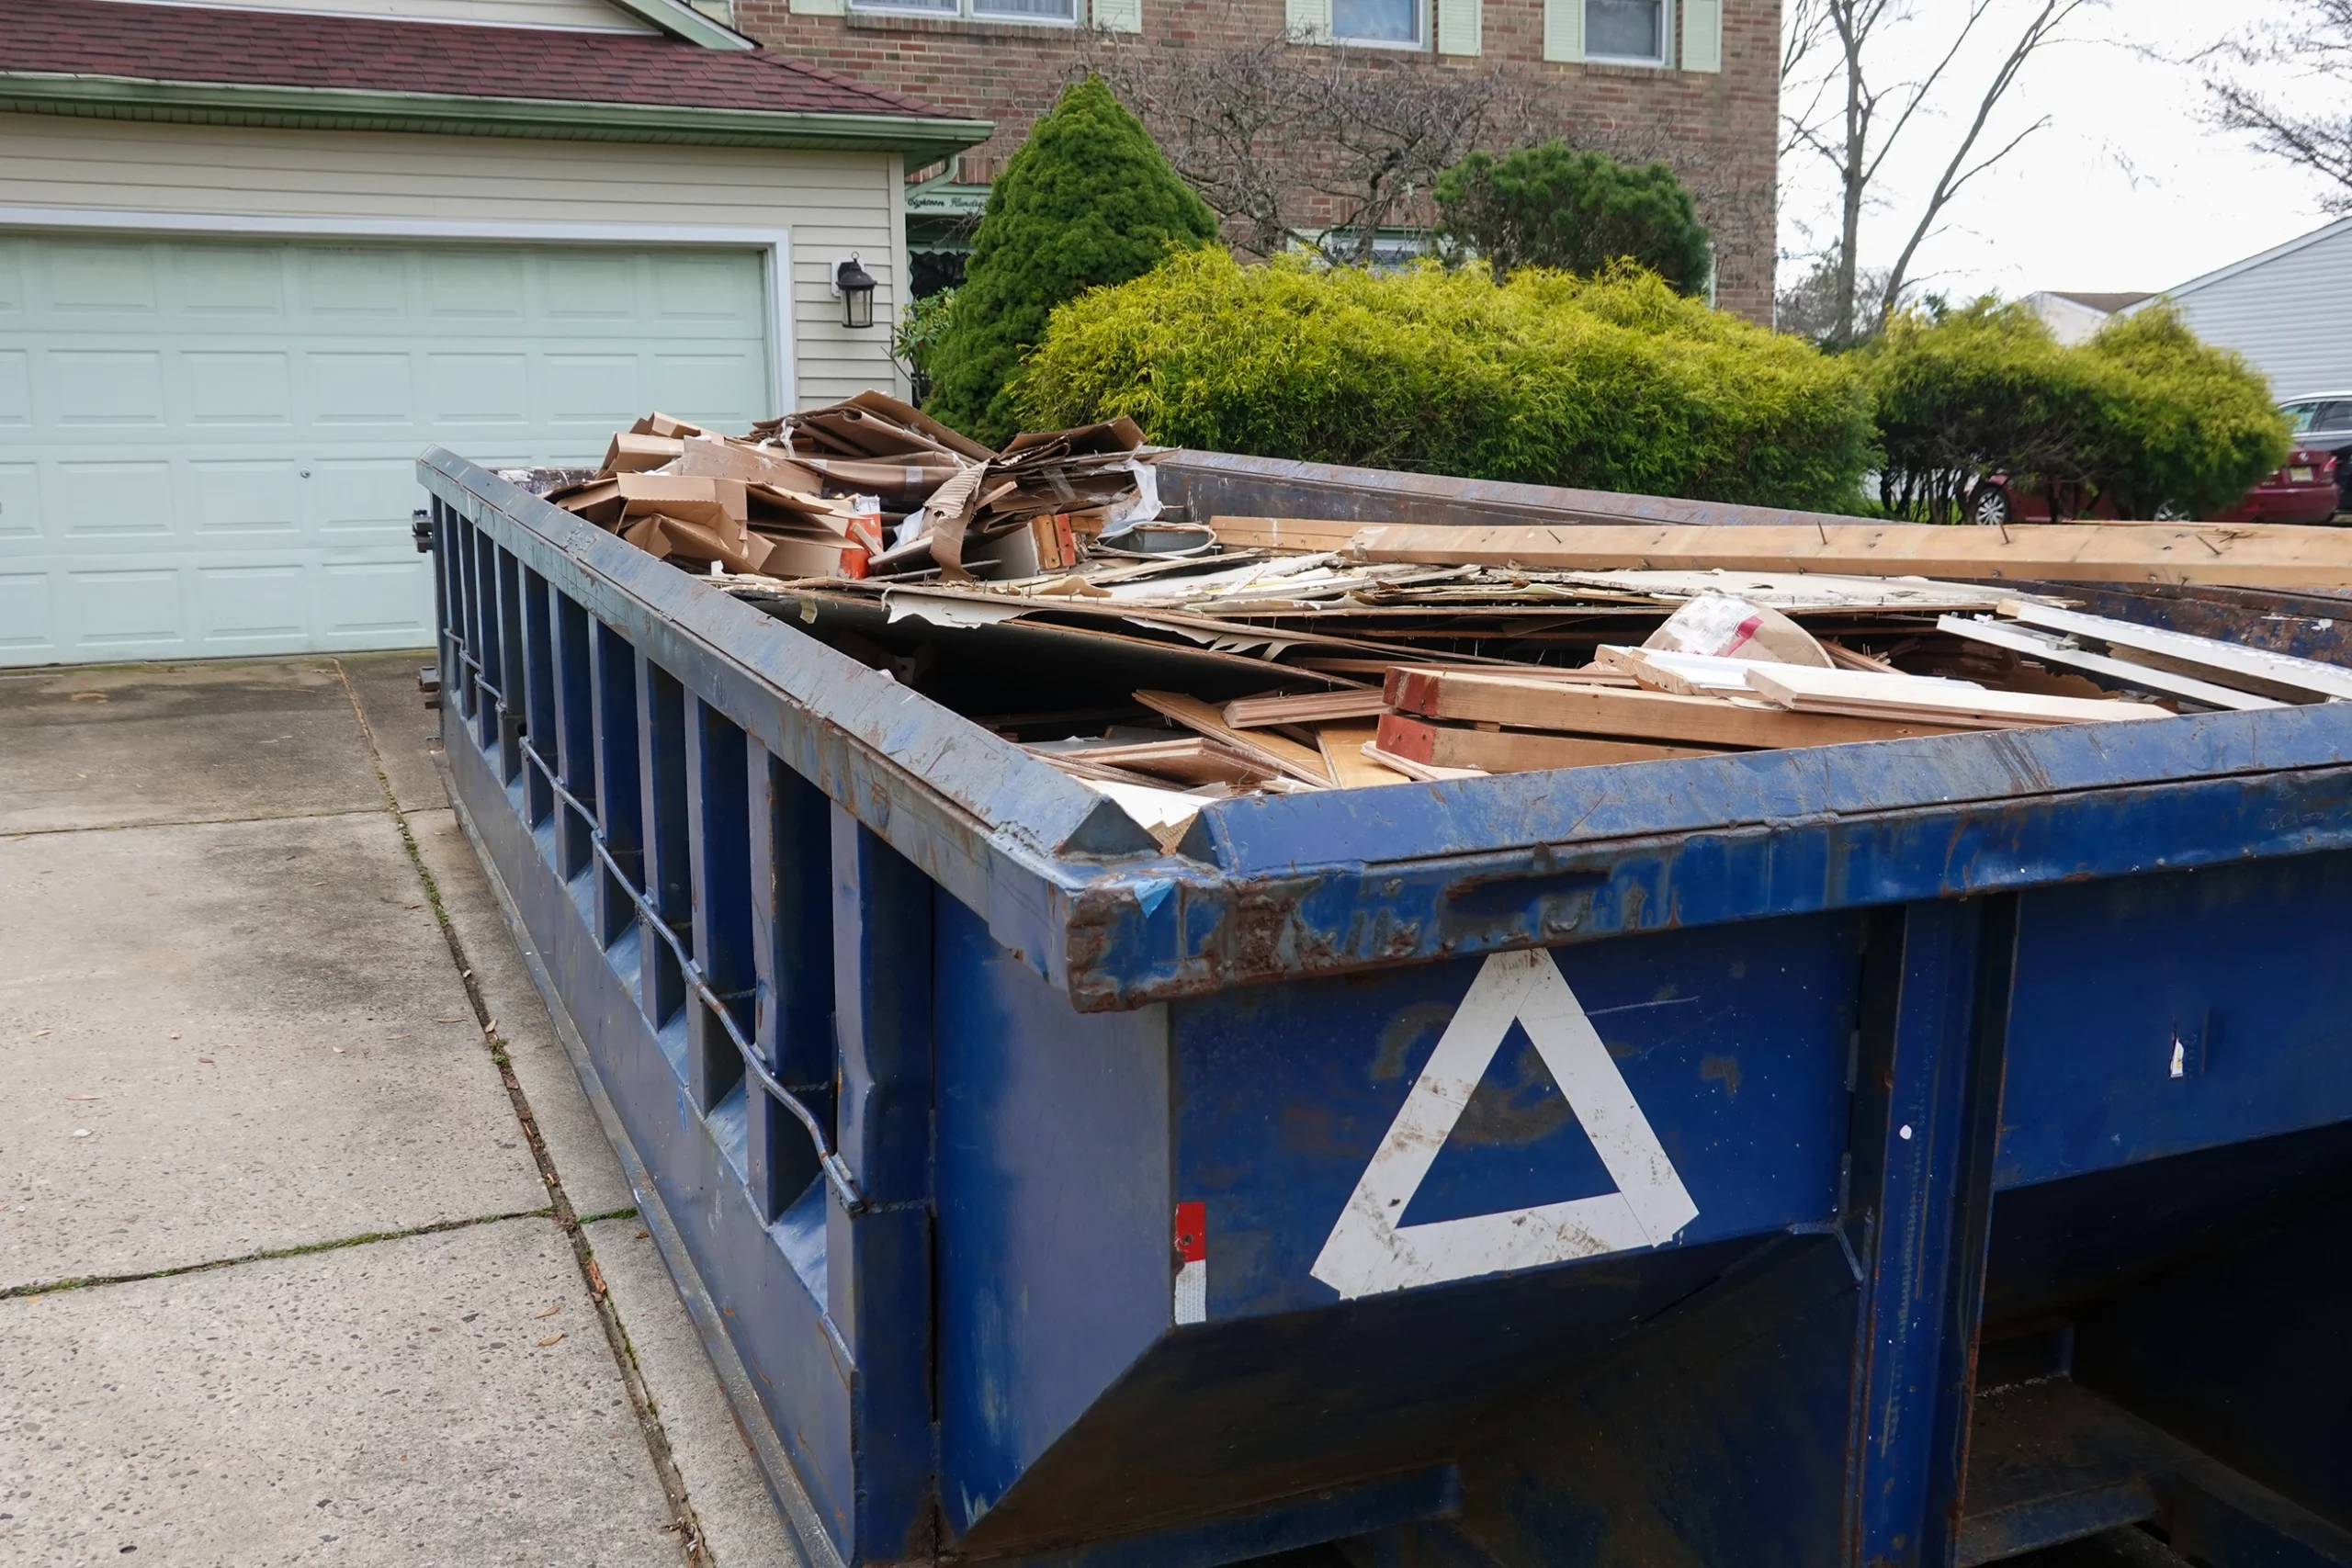 Cheapest Junk Removal Near Me: Your Guide to Budget-Friendly Cleanup Services